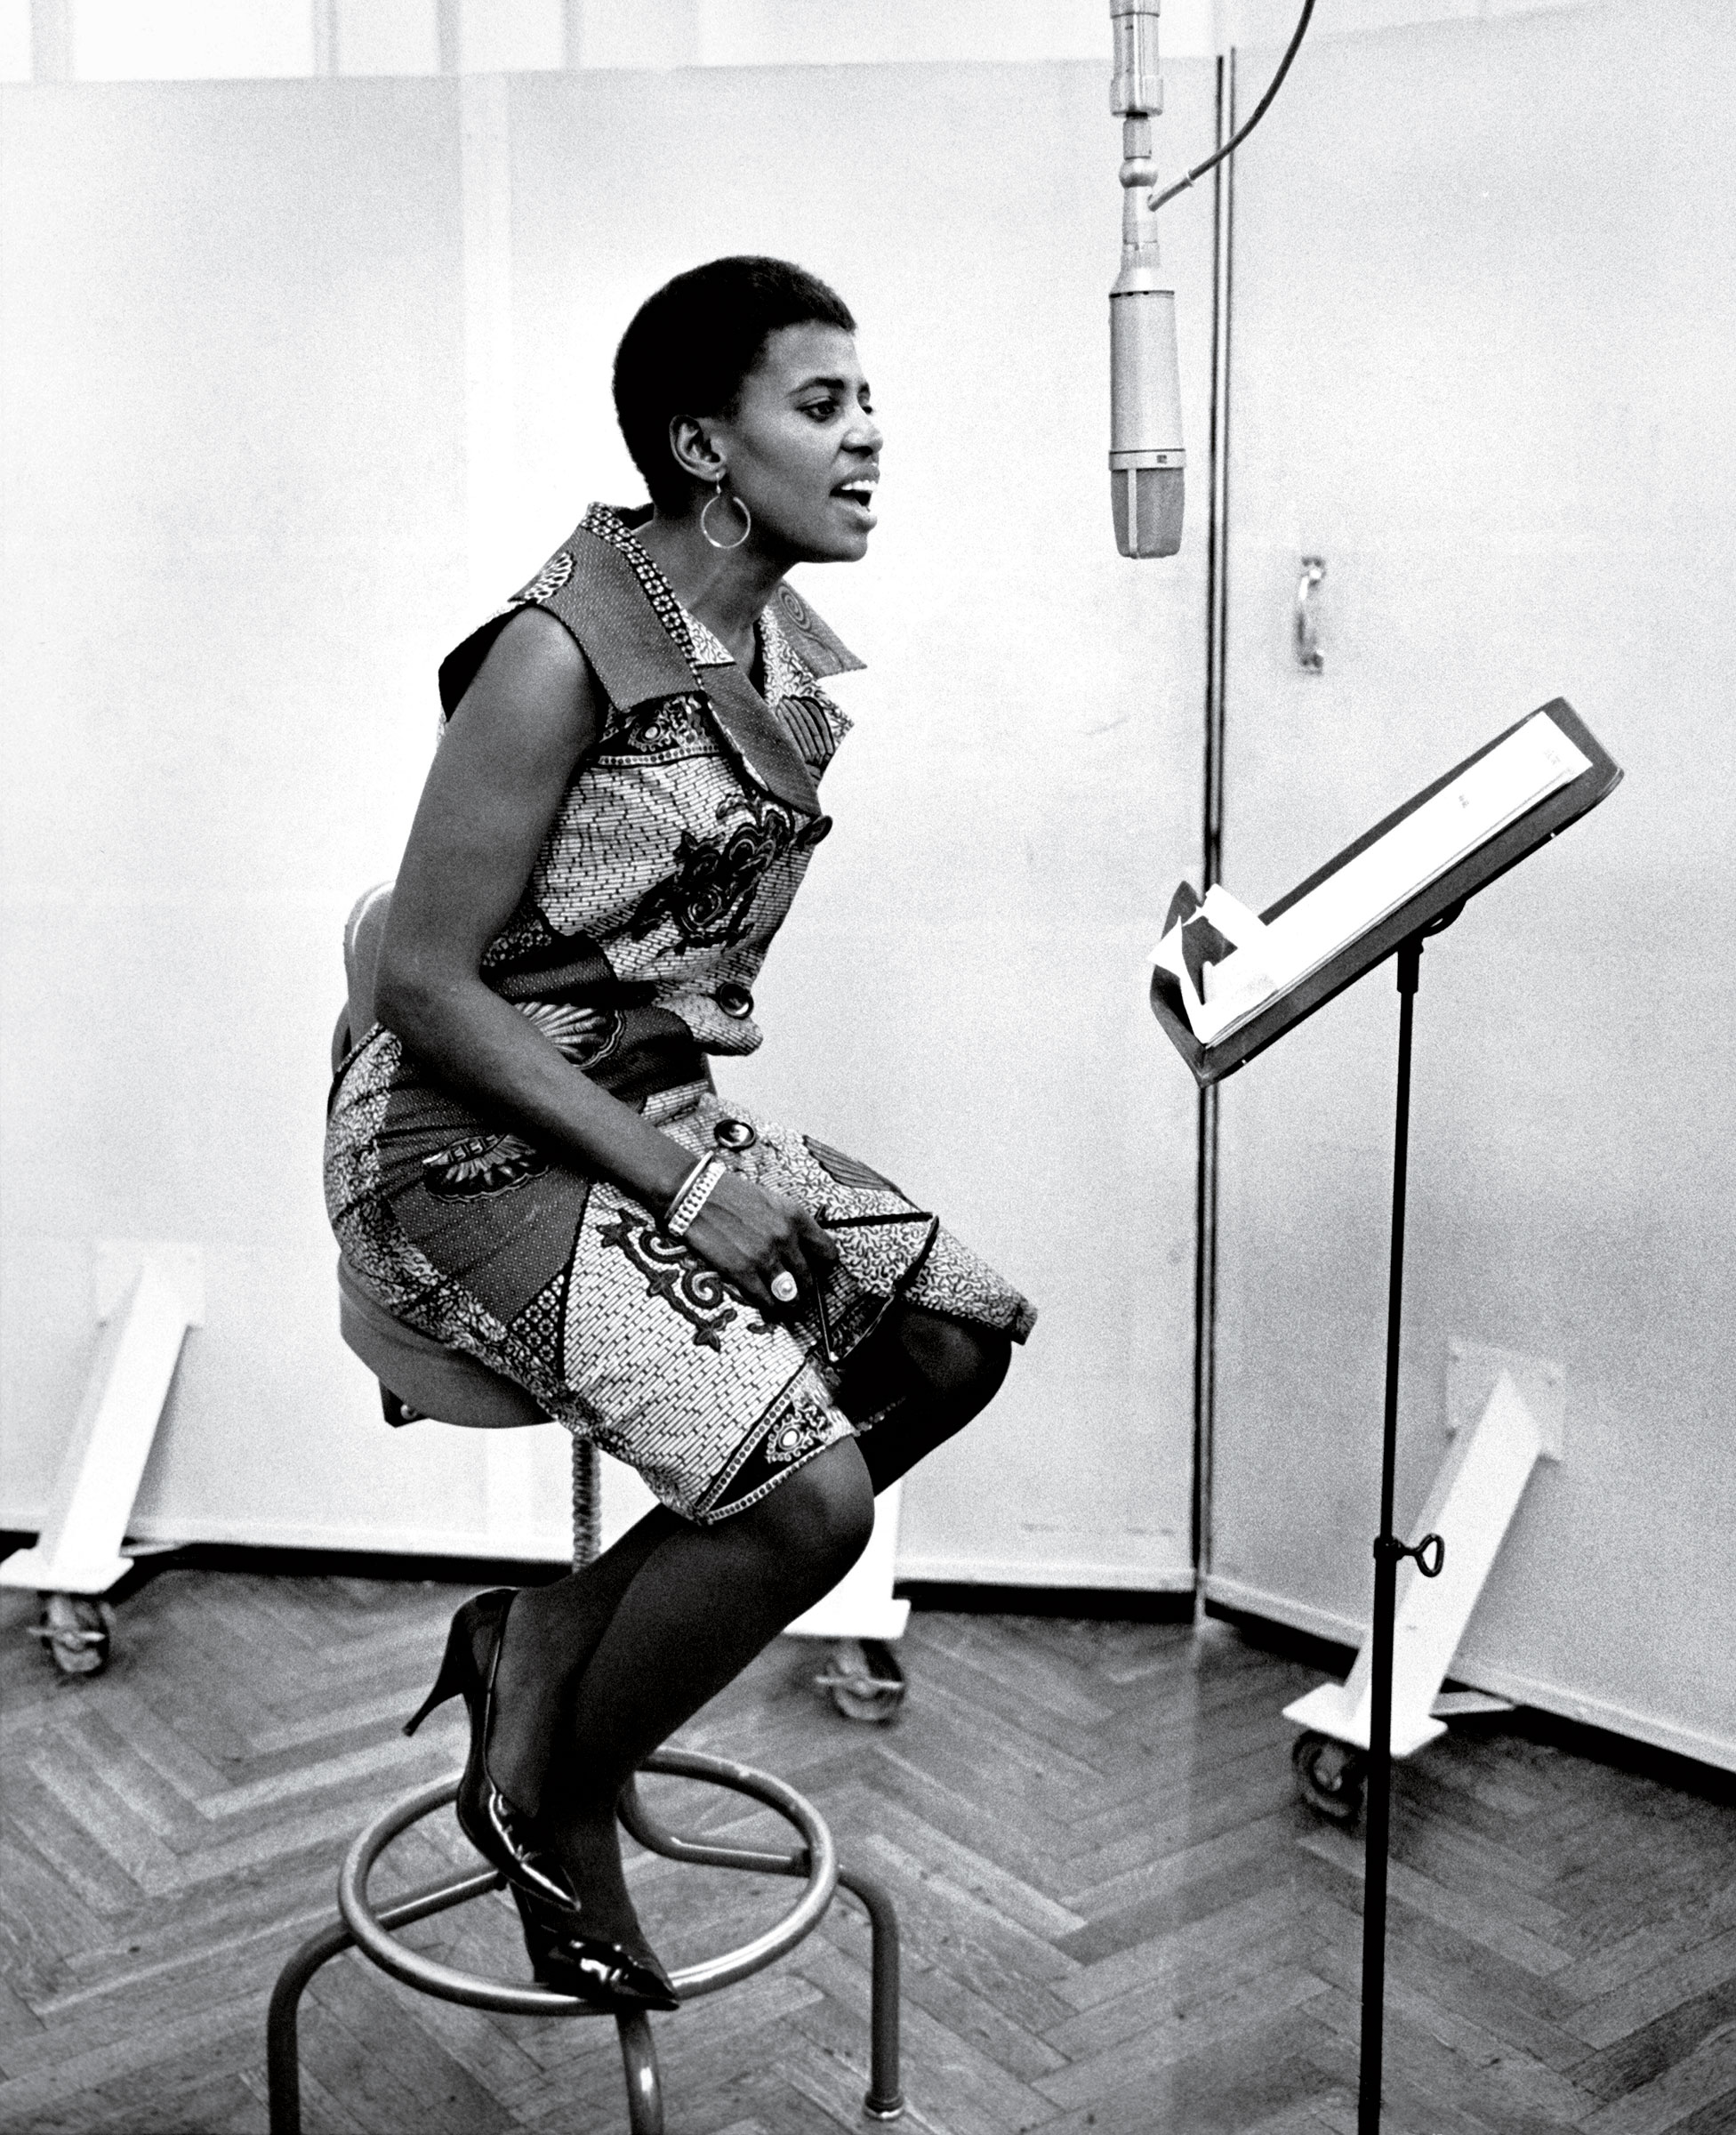 South African singer Zenzi Miriam Makeba in the RCA recording studios in the 1960s in New York City. (Michael Ochs Archives—Getty Images)